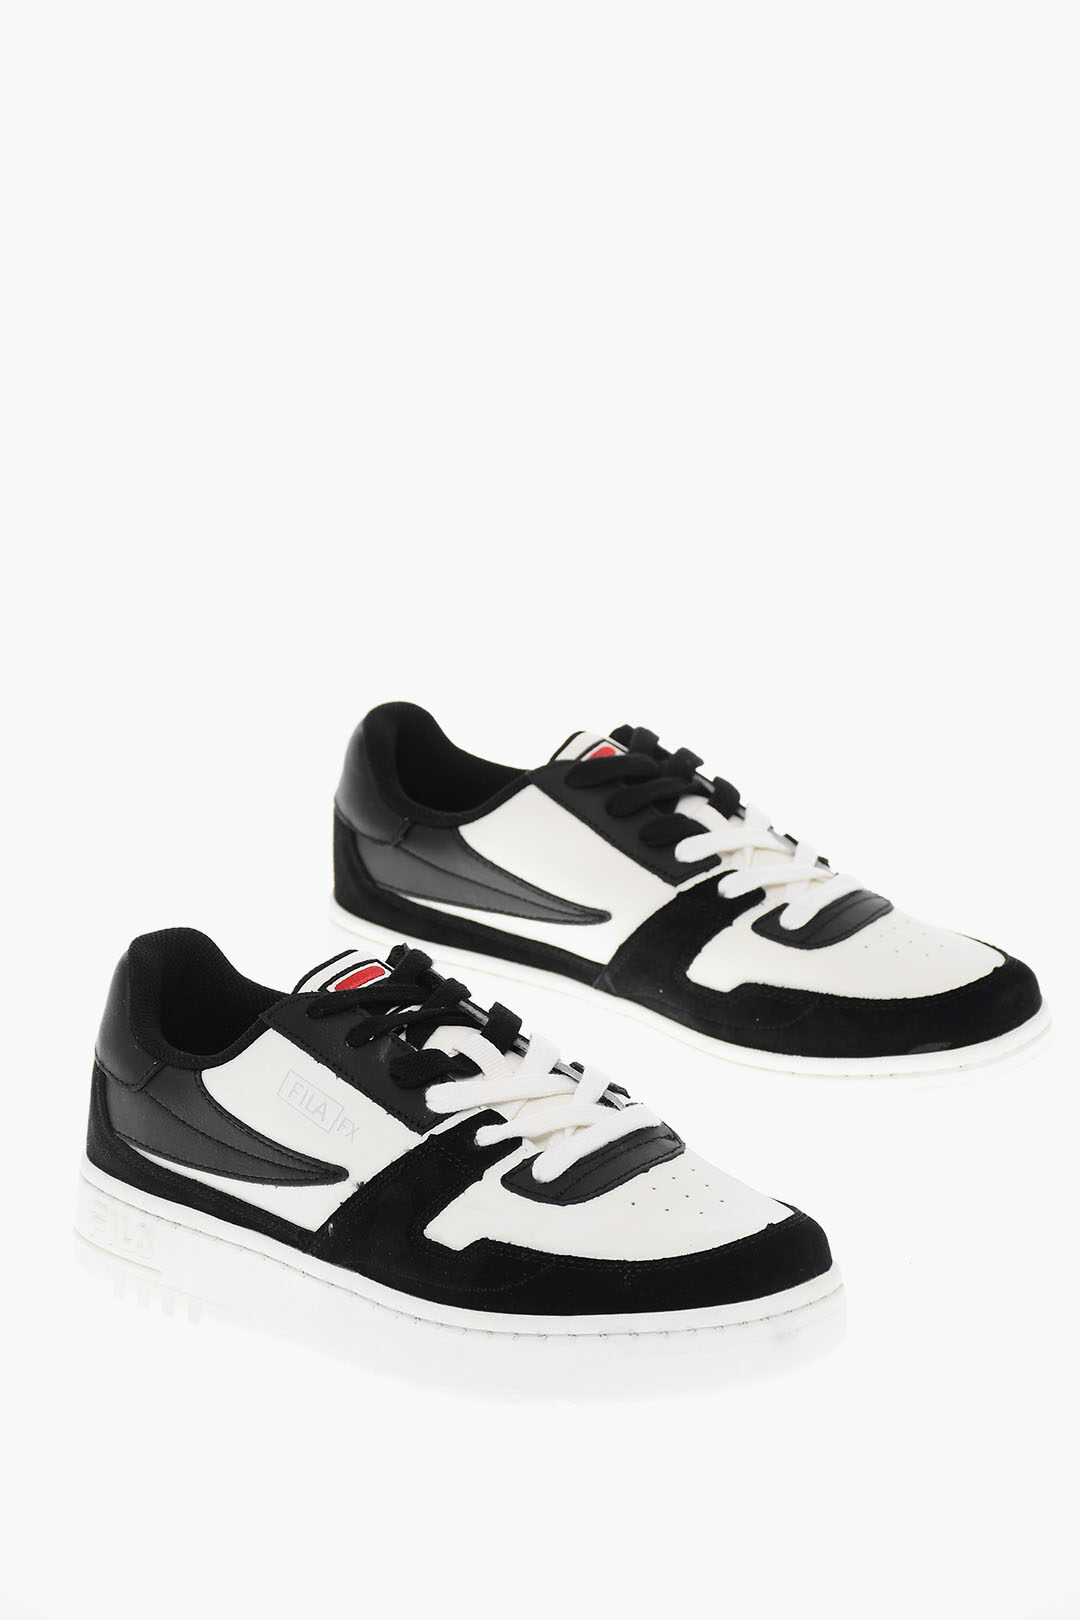 FILA FXVENTUNO CB Sneakers men - Glamood Outlet